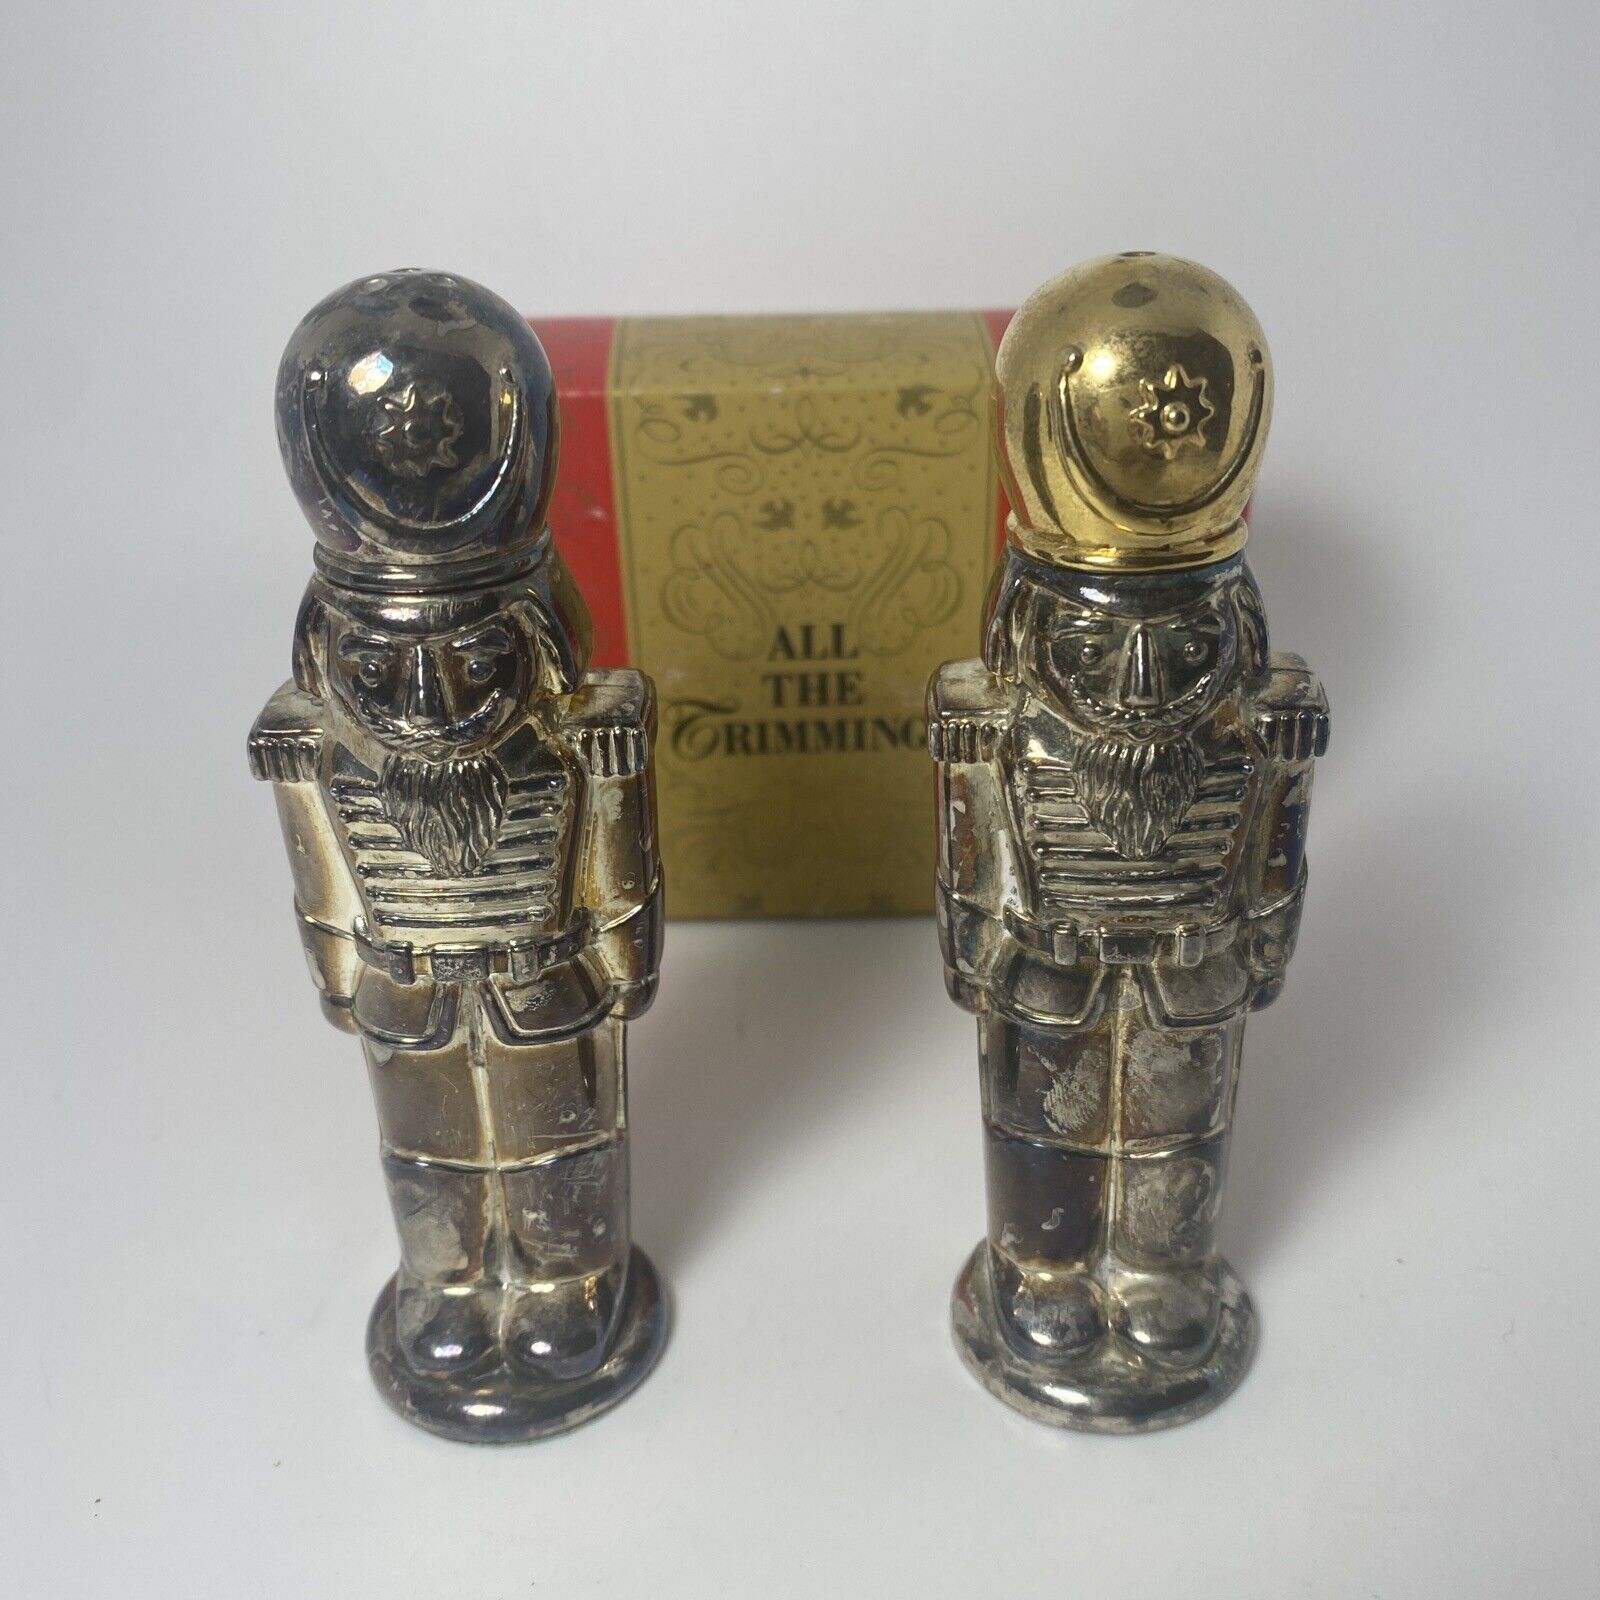 Godinger Art Co Siverplated Soldiers Salt Pepper Shakers All The Trimmings